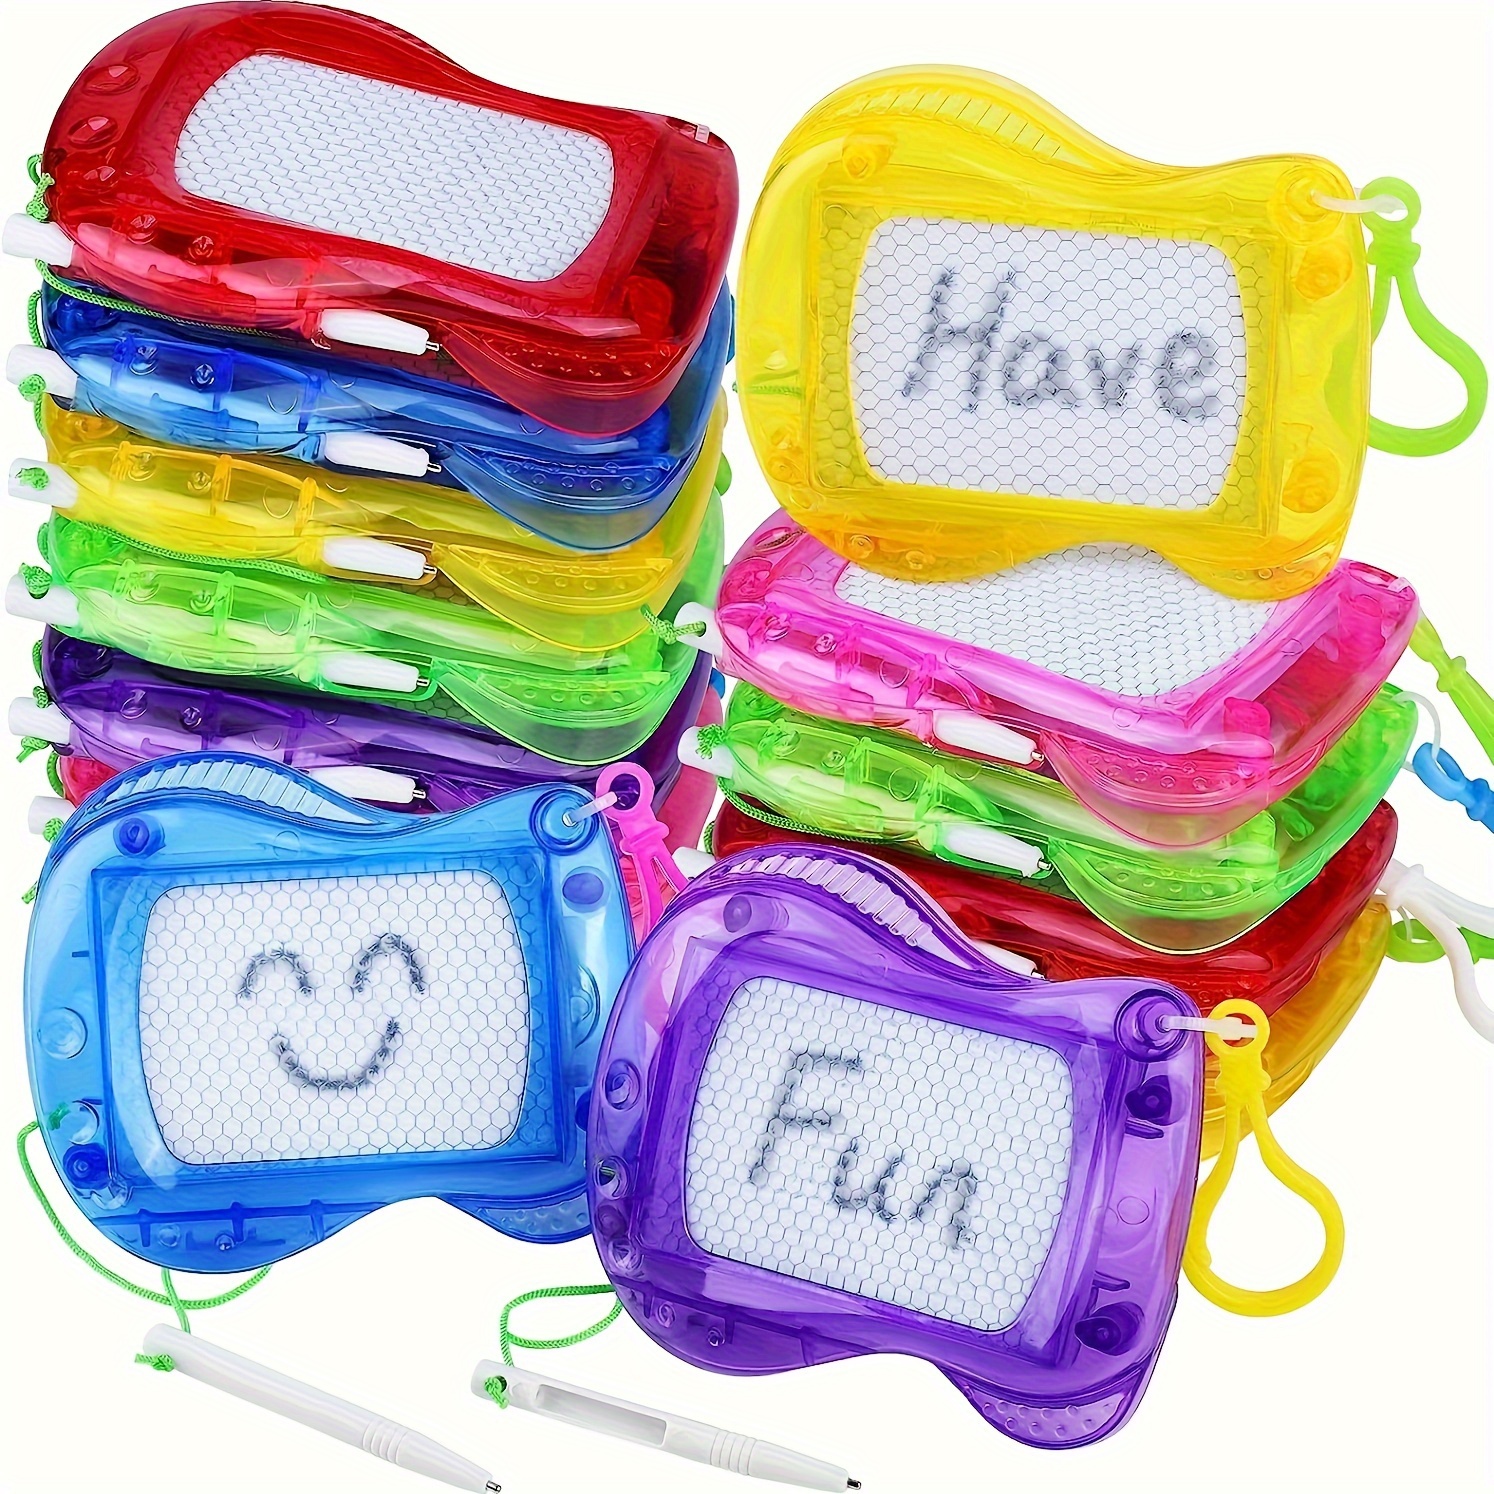 

12-pack Mini Magnetic Drawing Boards With Keychain - Erasable Doodle & Sketch Pads For Kids Ages 3-6, Perfect Birthday Party Favors And Goodie Bag Fillers